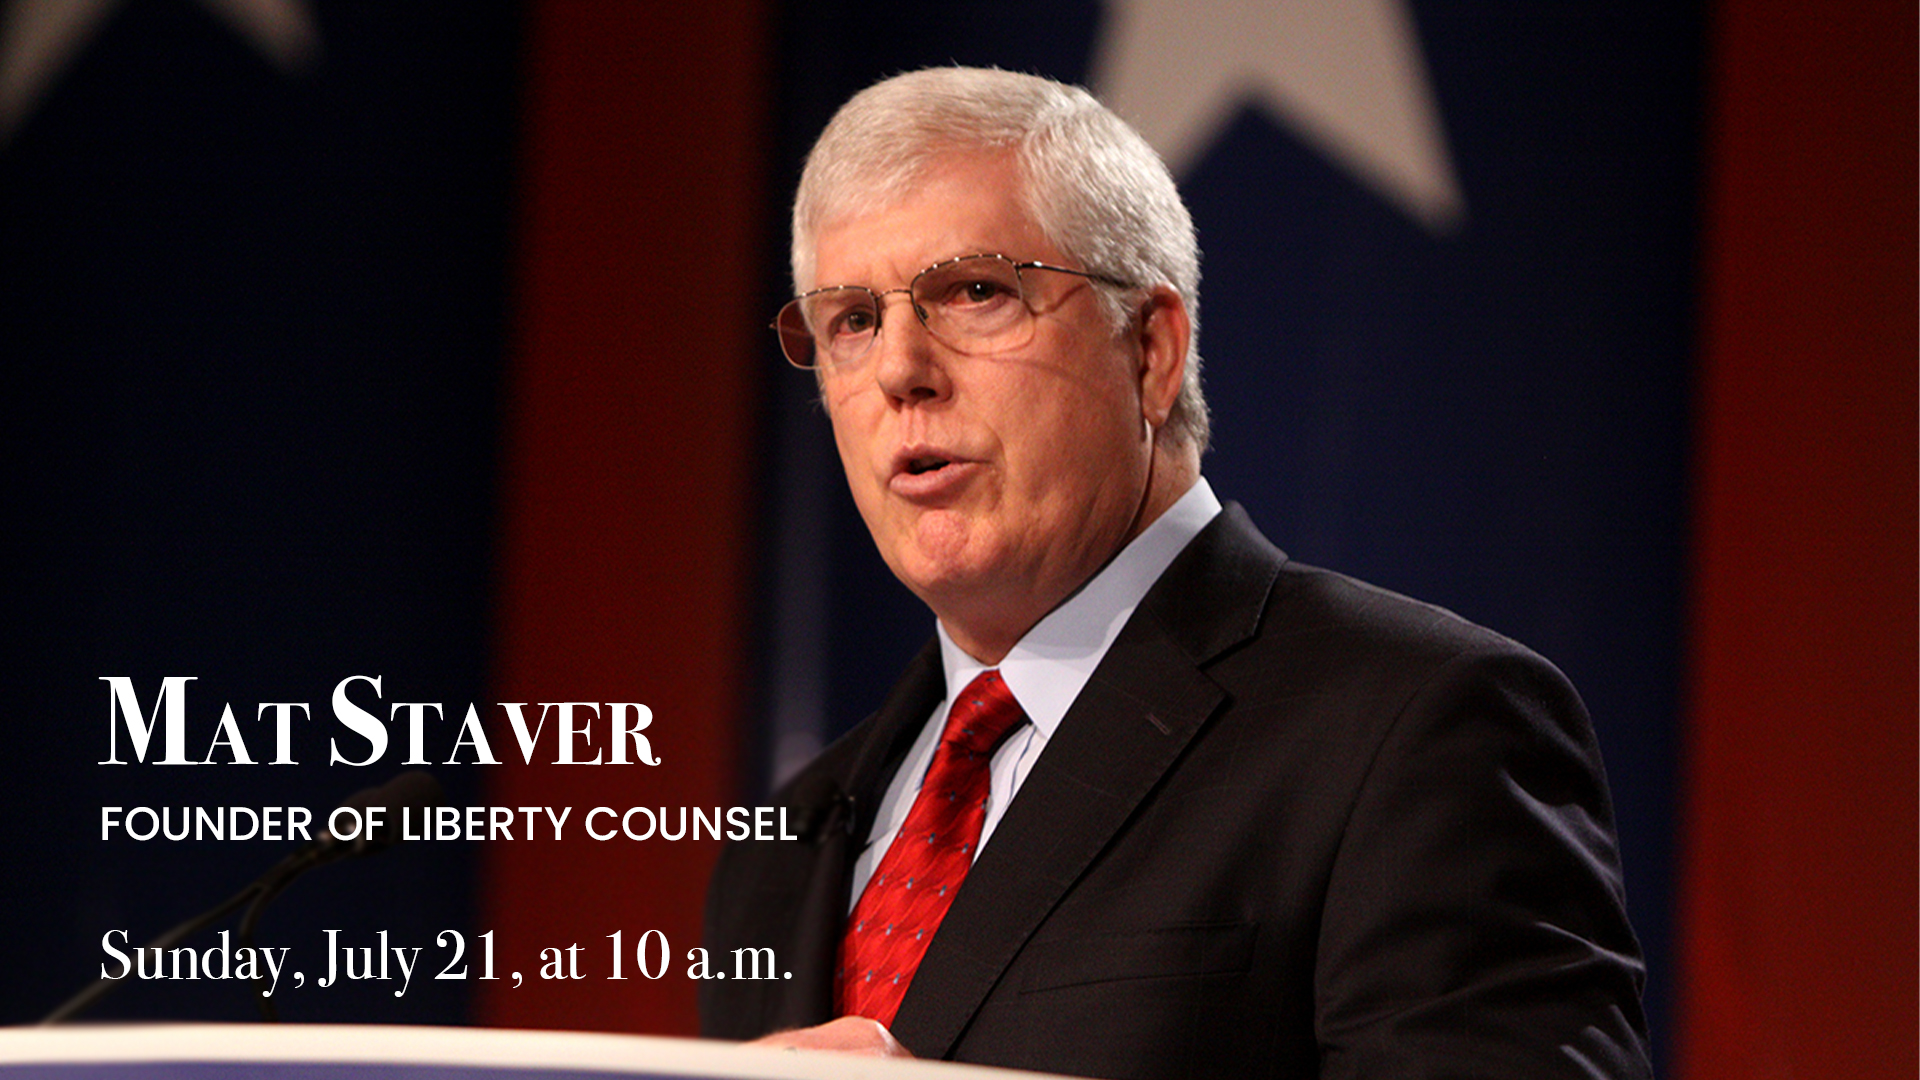 Mat Staver speaking at Volusia County Baptist Church Sunday, July 21, at 10 a.m.